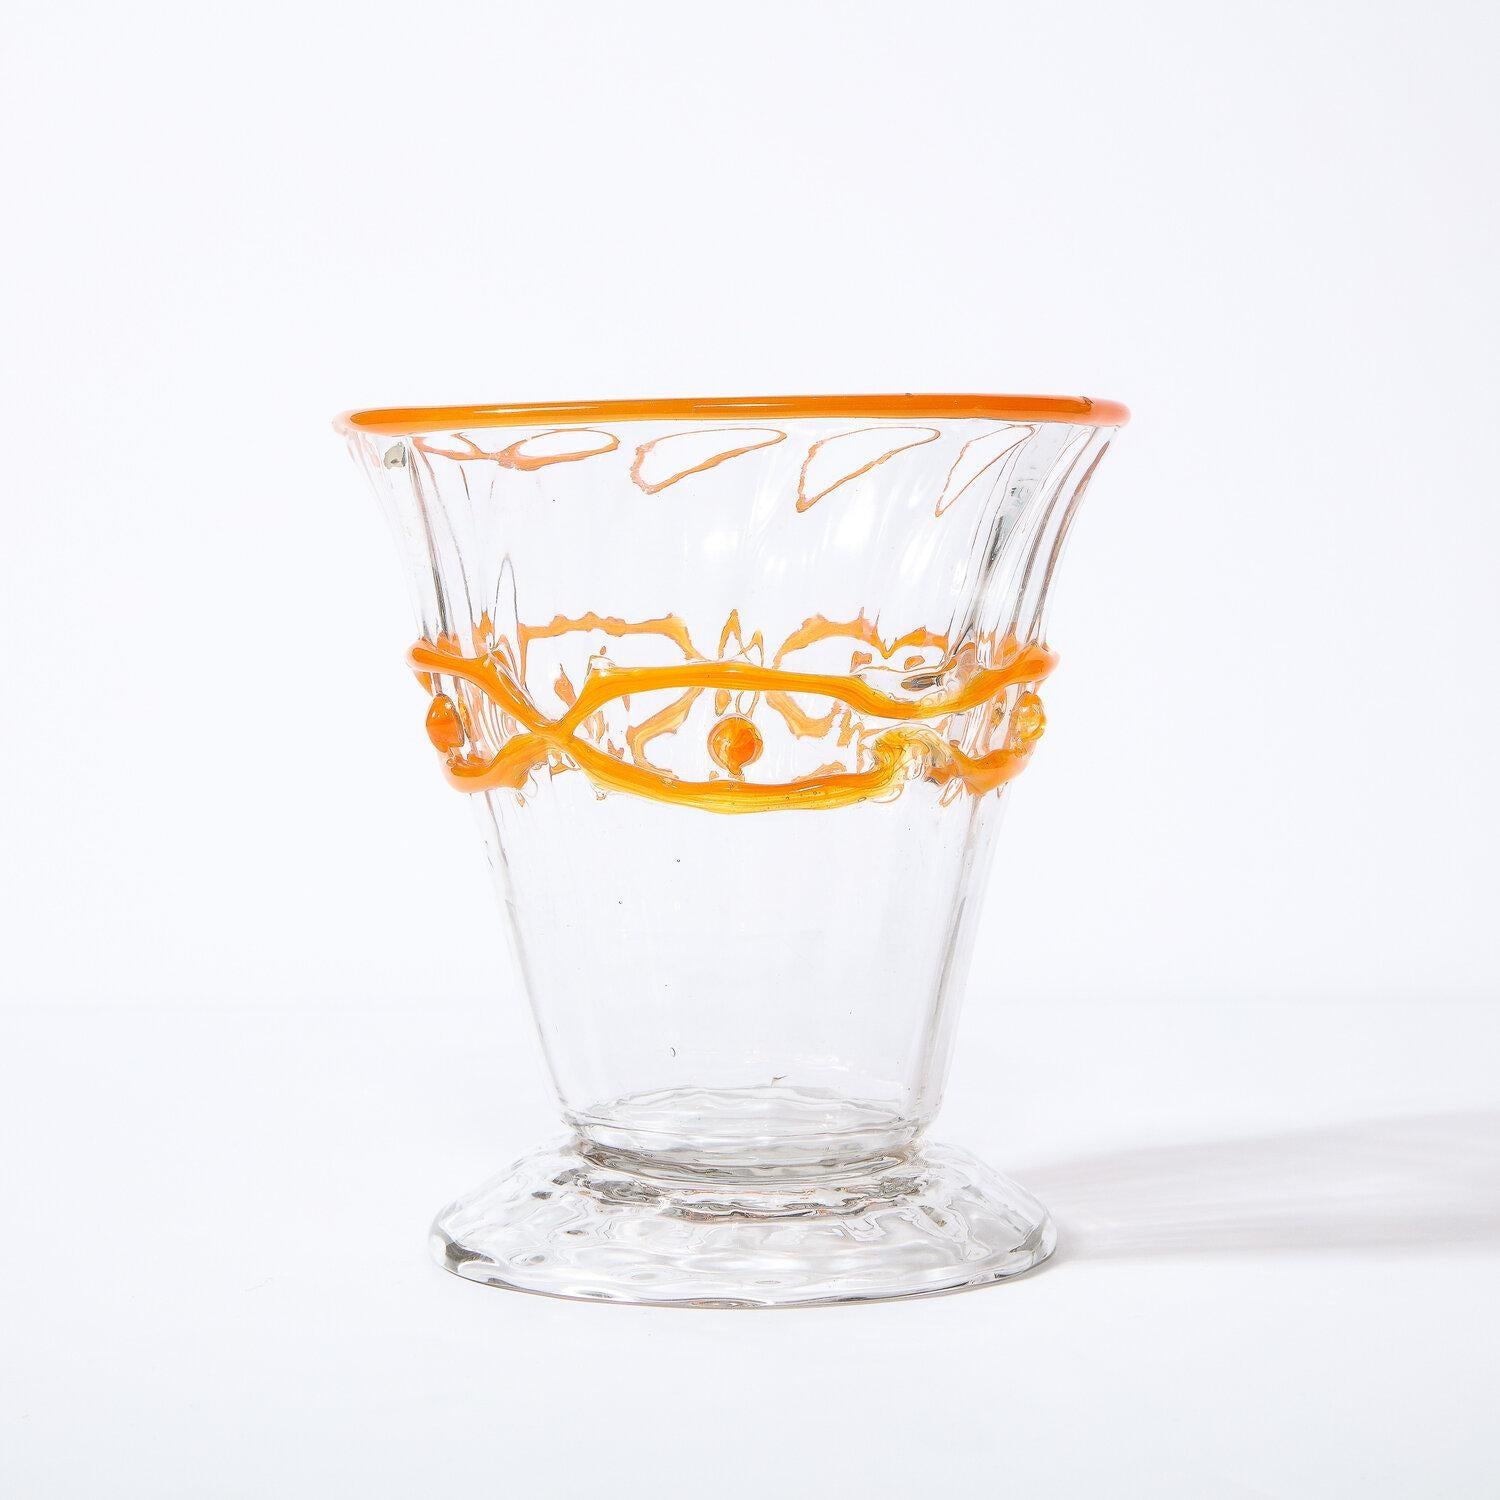 French Art Deco Translucent Glass Vase w/ Tangerine Accents in Relief Signed Daum Nancy